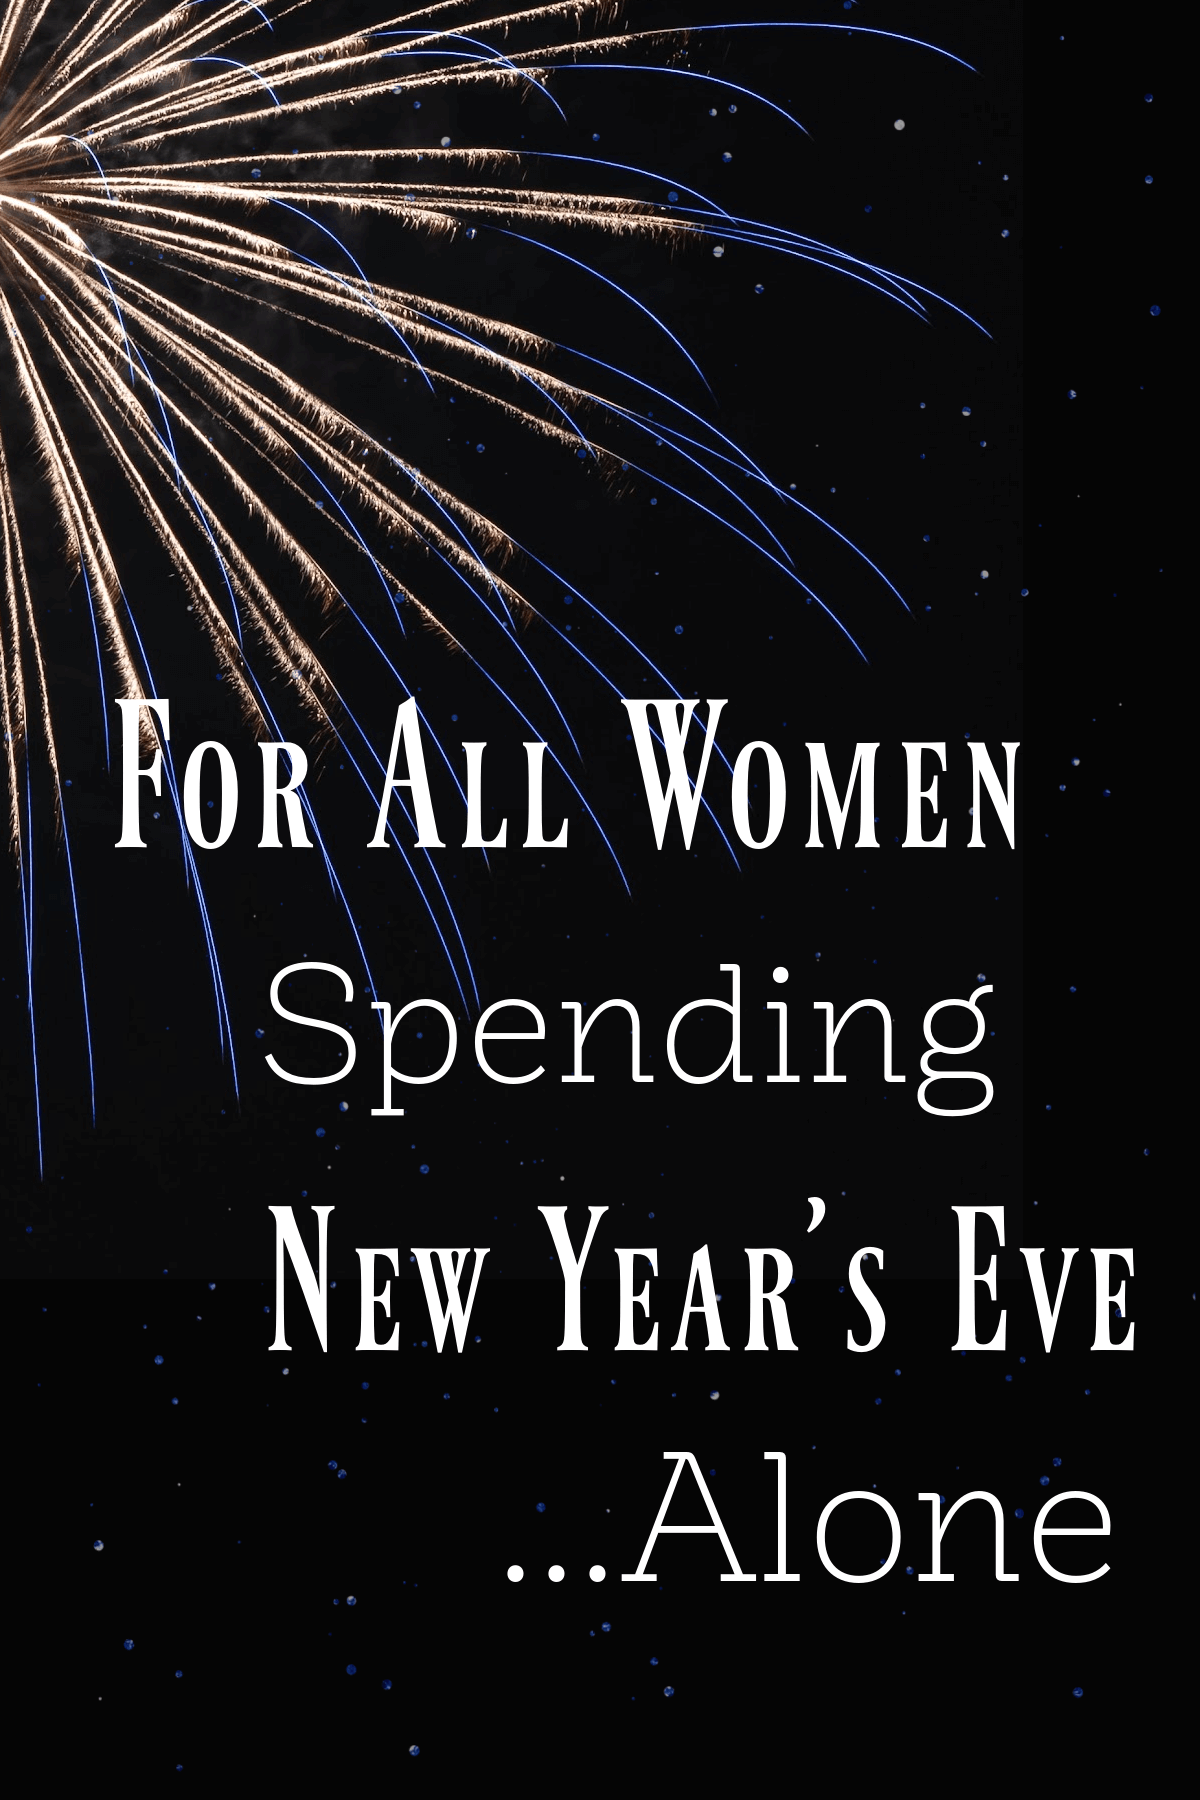 For Women Spending New Year’s Eve Alone